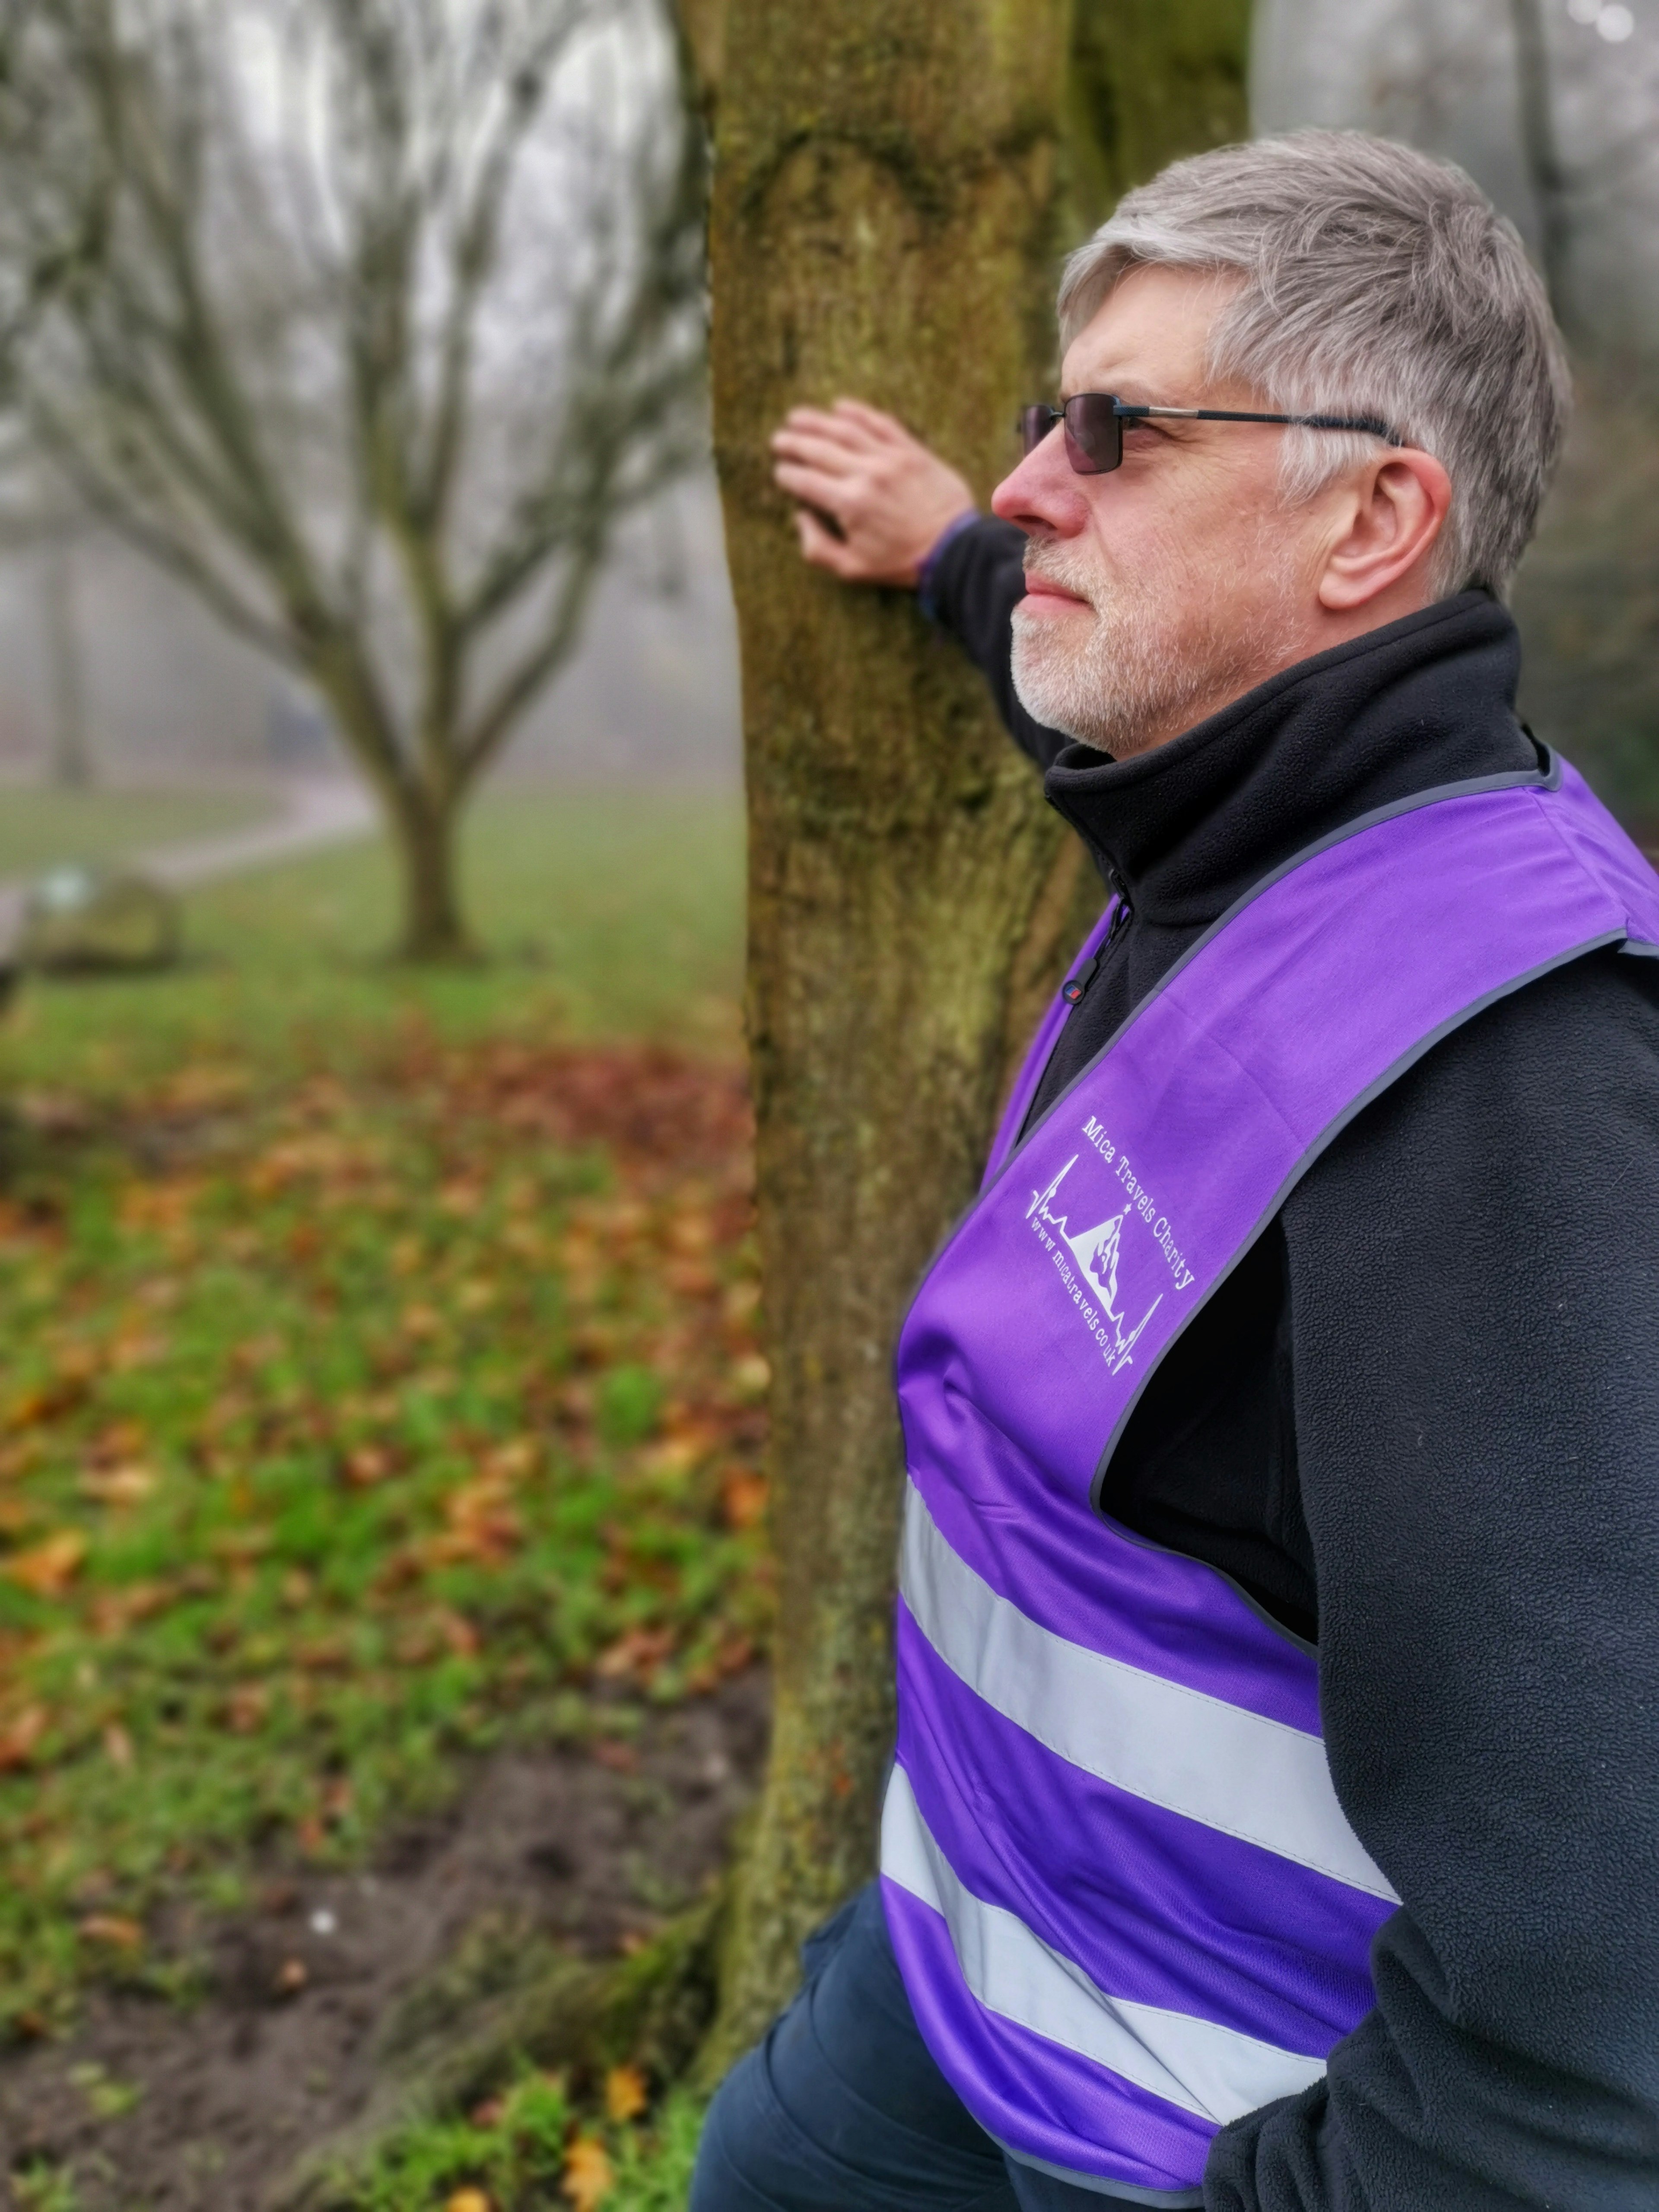 Mike leaning against a tree wearing a purple Mica Travels reflective vest